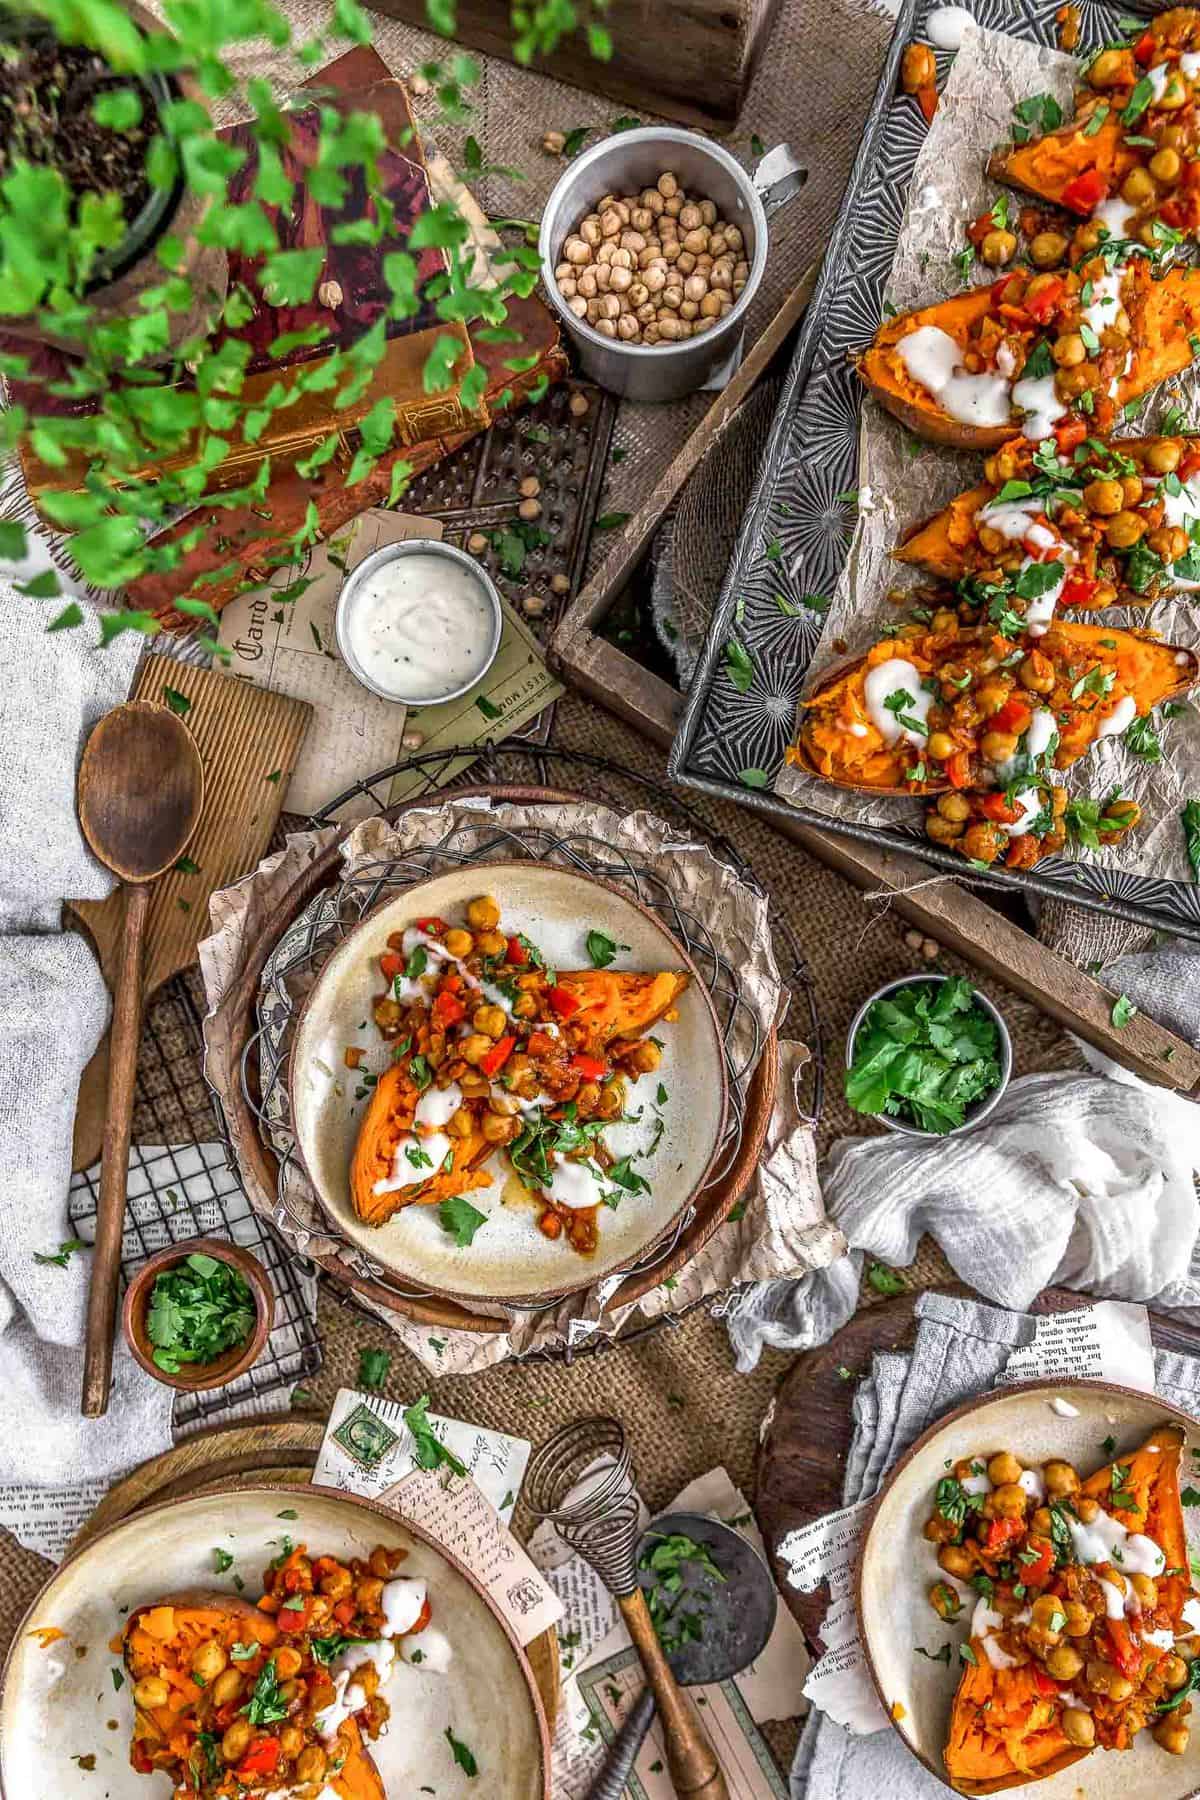 Tablescape of Moroccan Spiced Chickpeas and Garlic Sauce over sweet potatoes